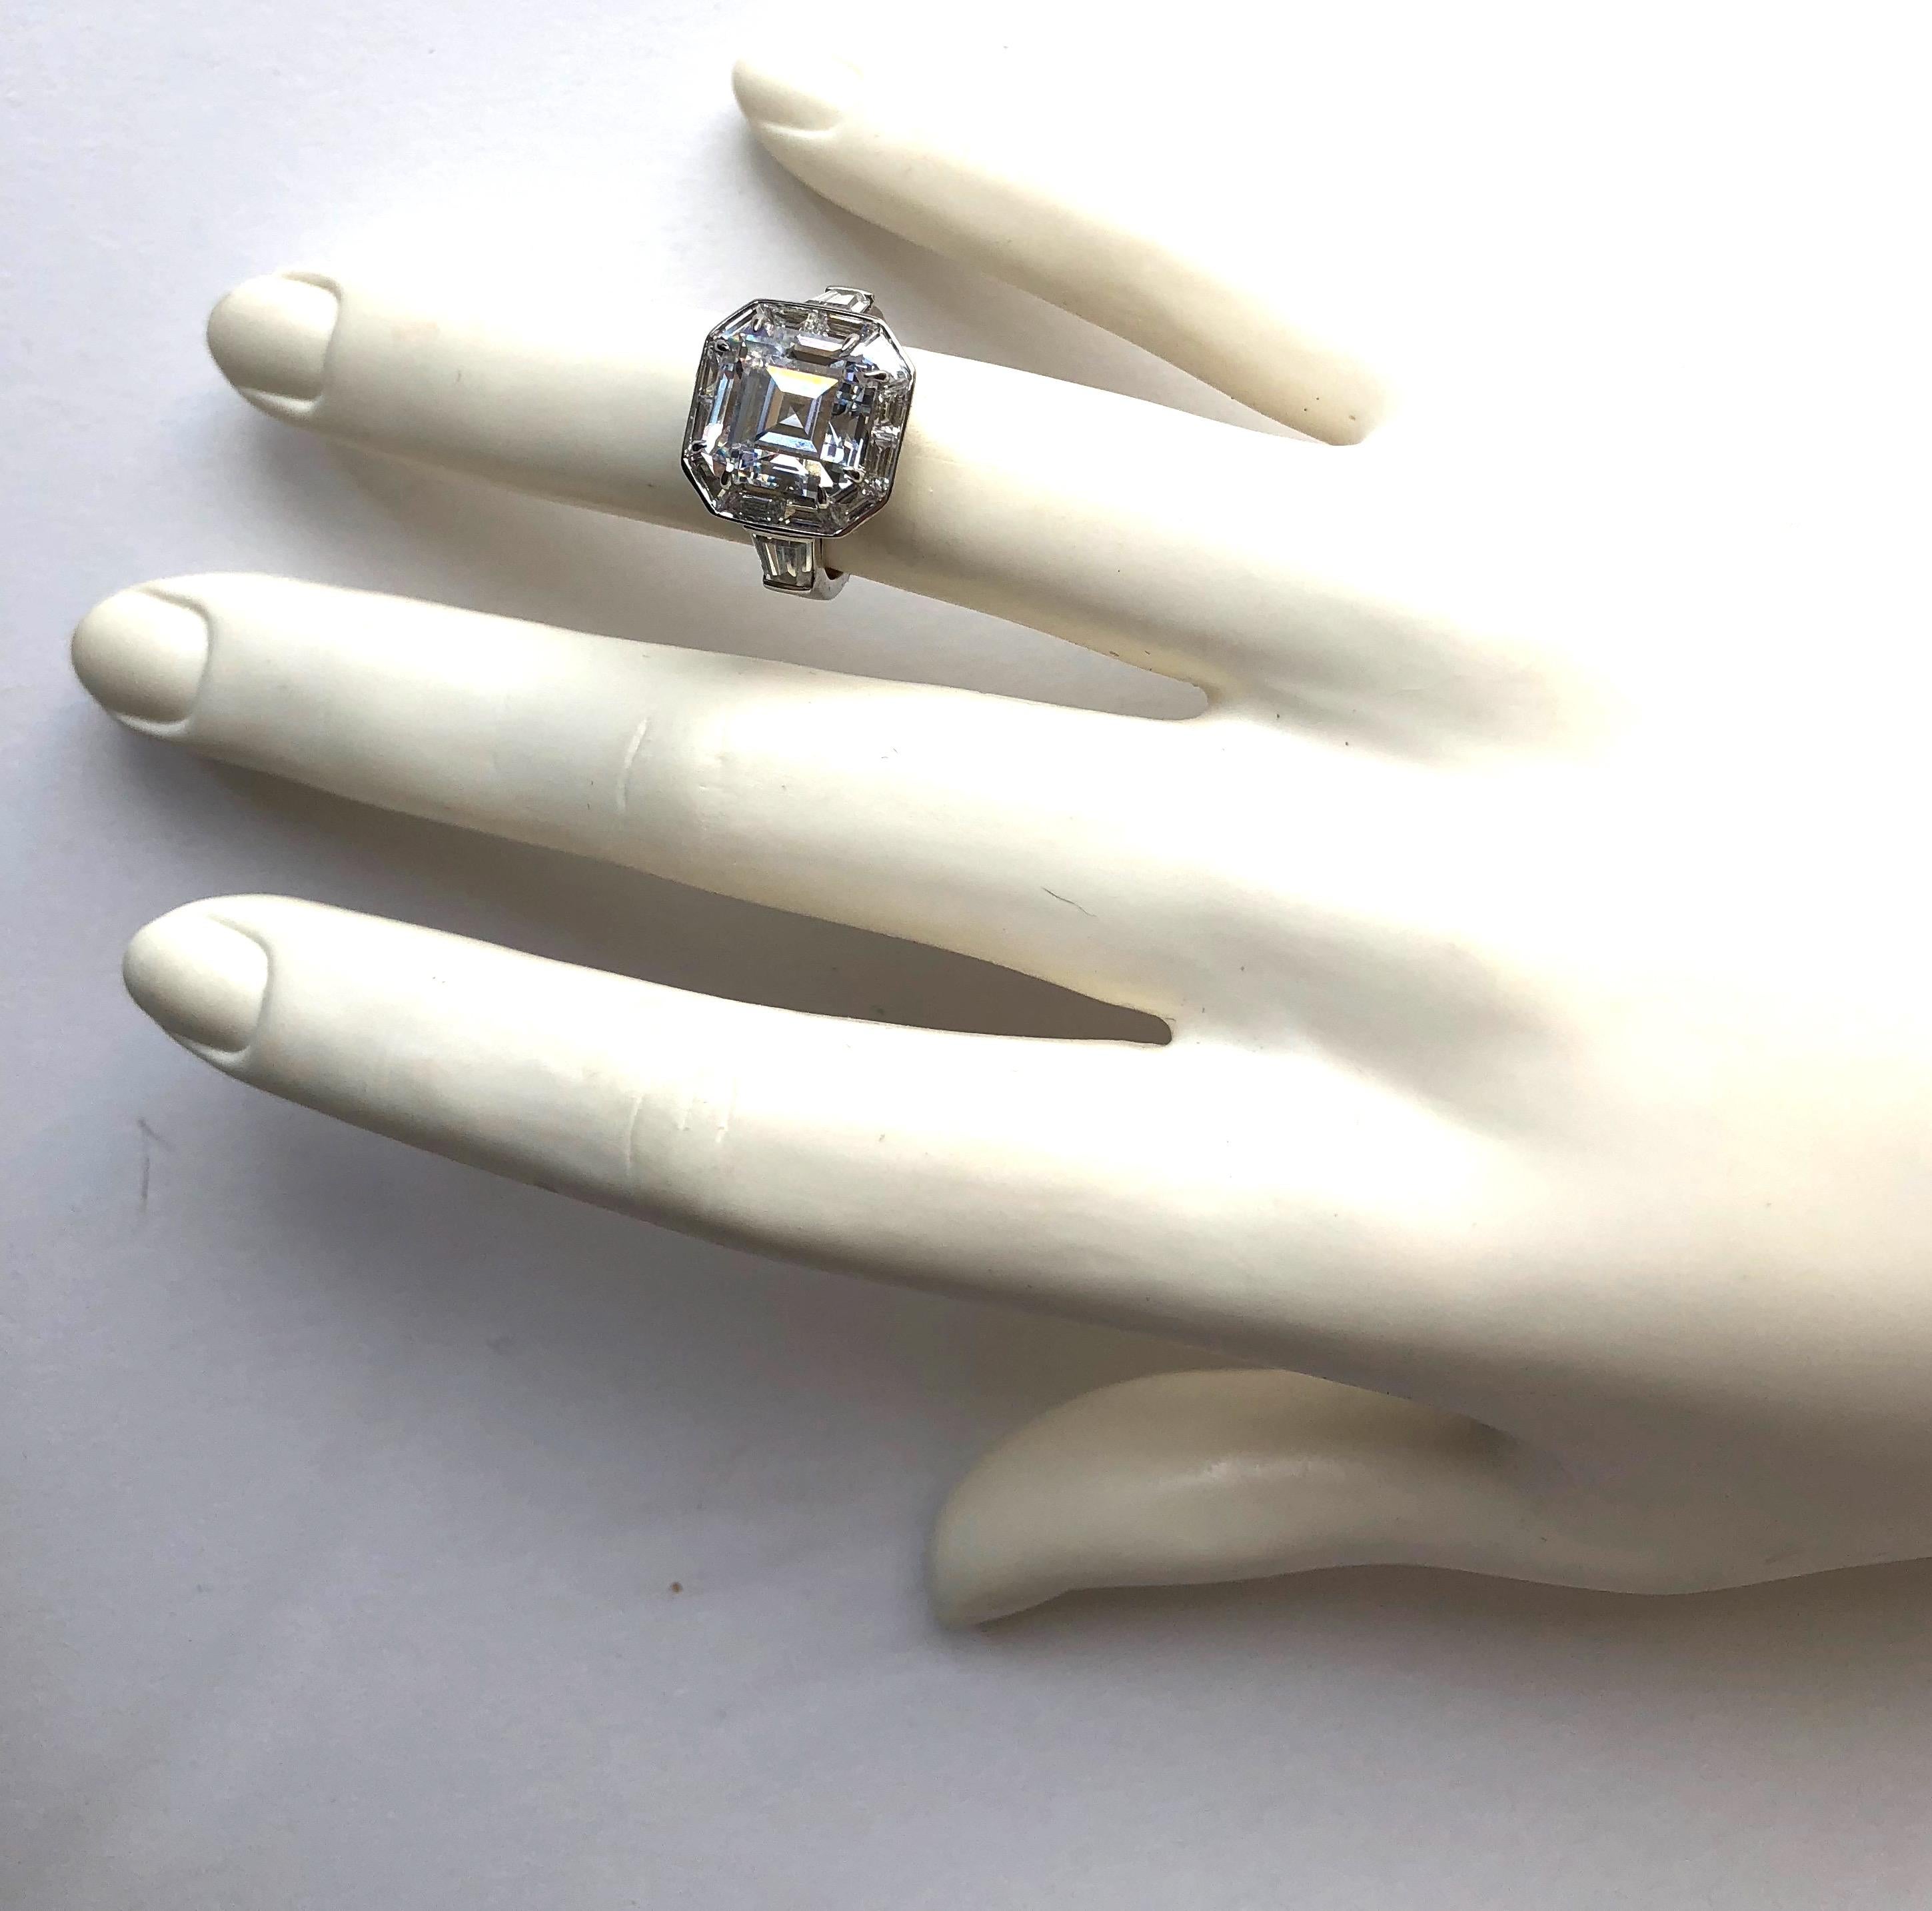 Magnificent Costume Jewelry Art Deco Style Square Cubic Zirconia Diamond Halo Style Silver Ring Bordered with Cubic Zirconia Fancy-Cut Baguettes and Tapers on the Shank. 
Center 'diamond' looks a like a 5 carat, bright and sparkly. The ring measures